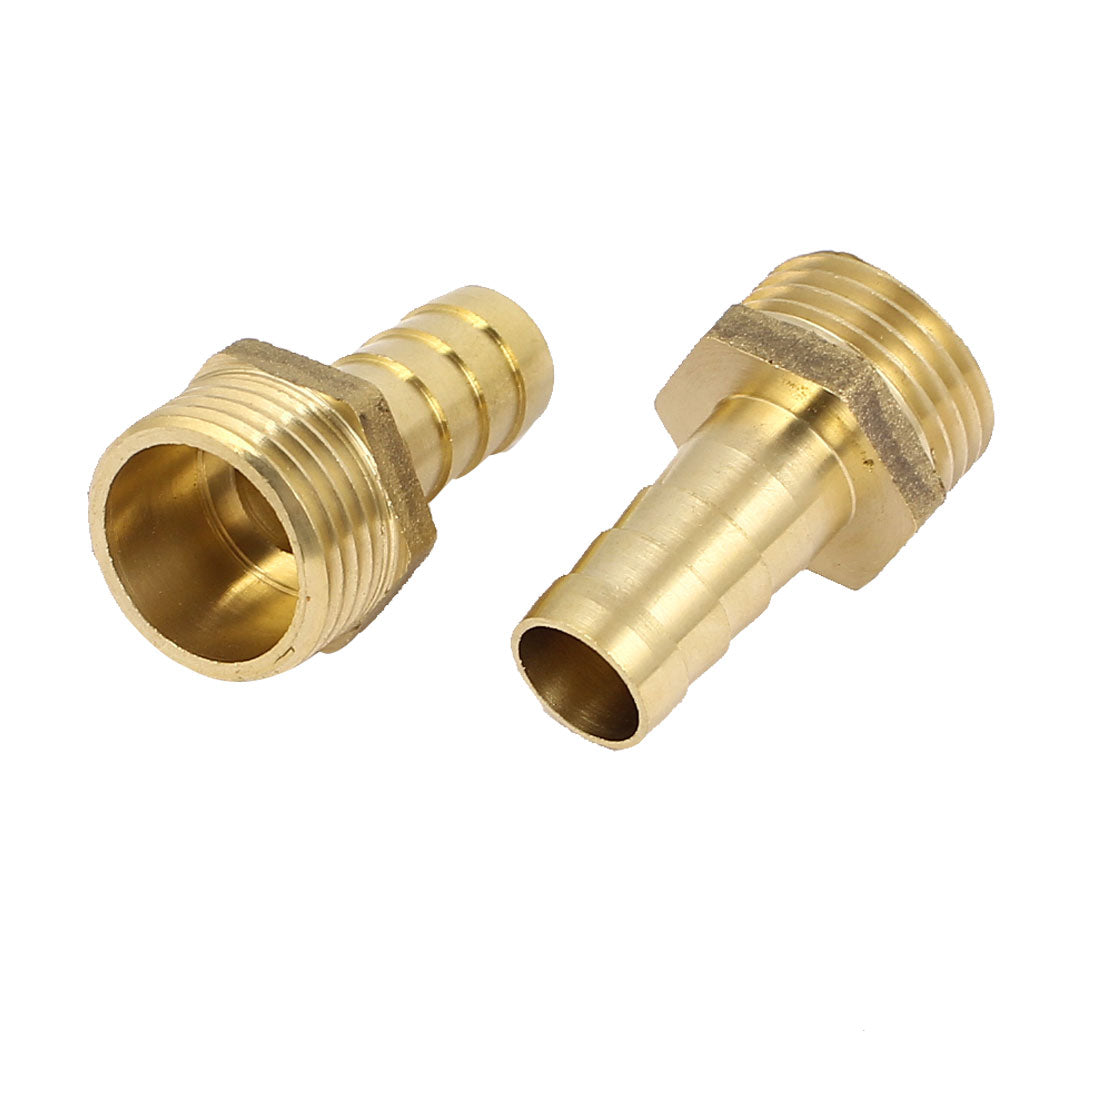 Uxcell Uxcell 1/2BSP Male Thread 12mm Inner Dia Brass Hose Barb Coupler Fitting Connector 2pcs